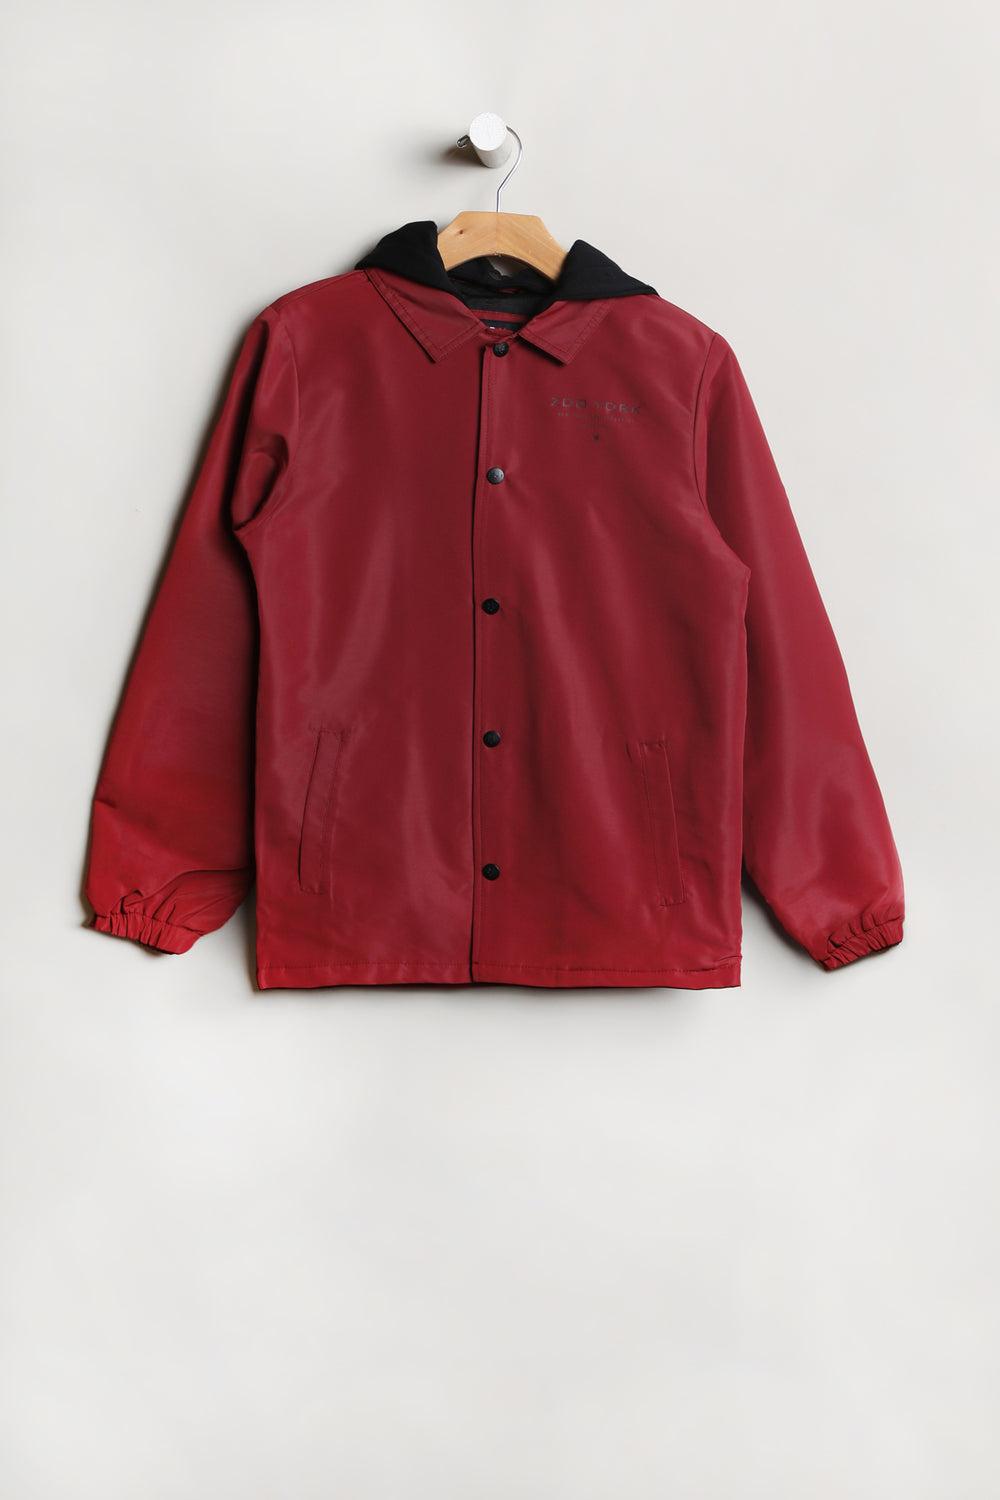 Zoo York Youth Coach Jacket Red